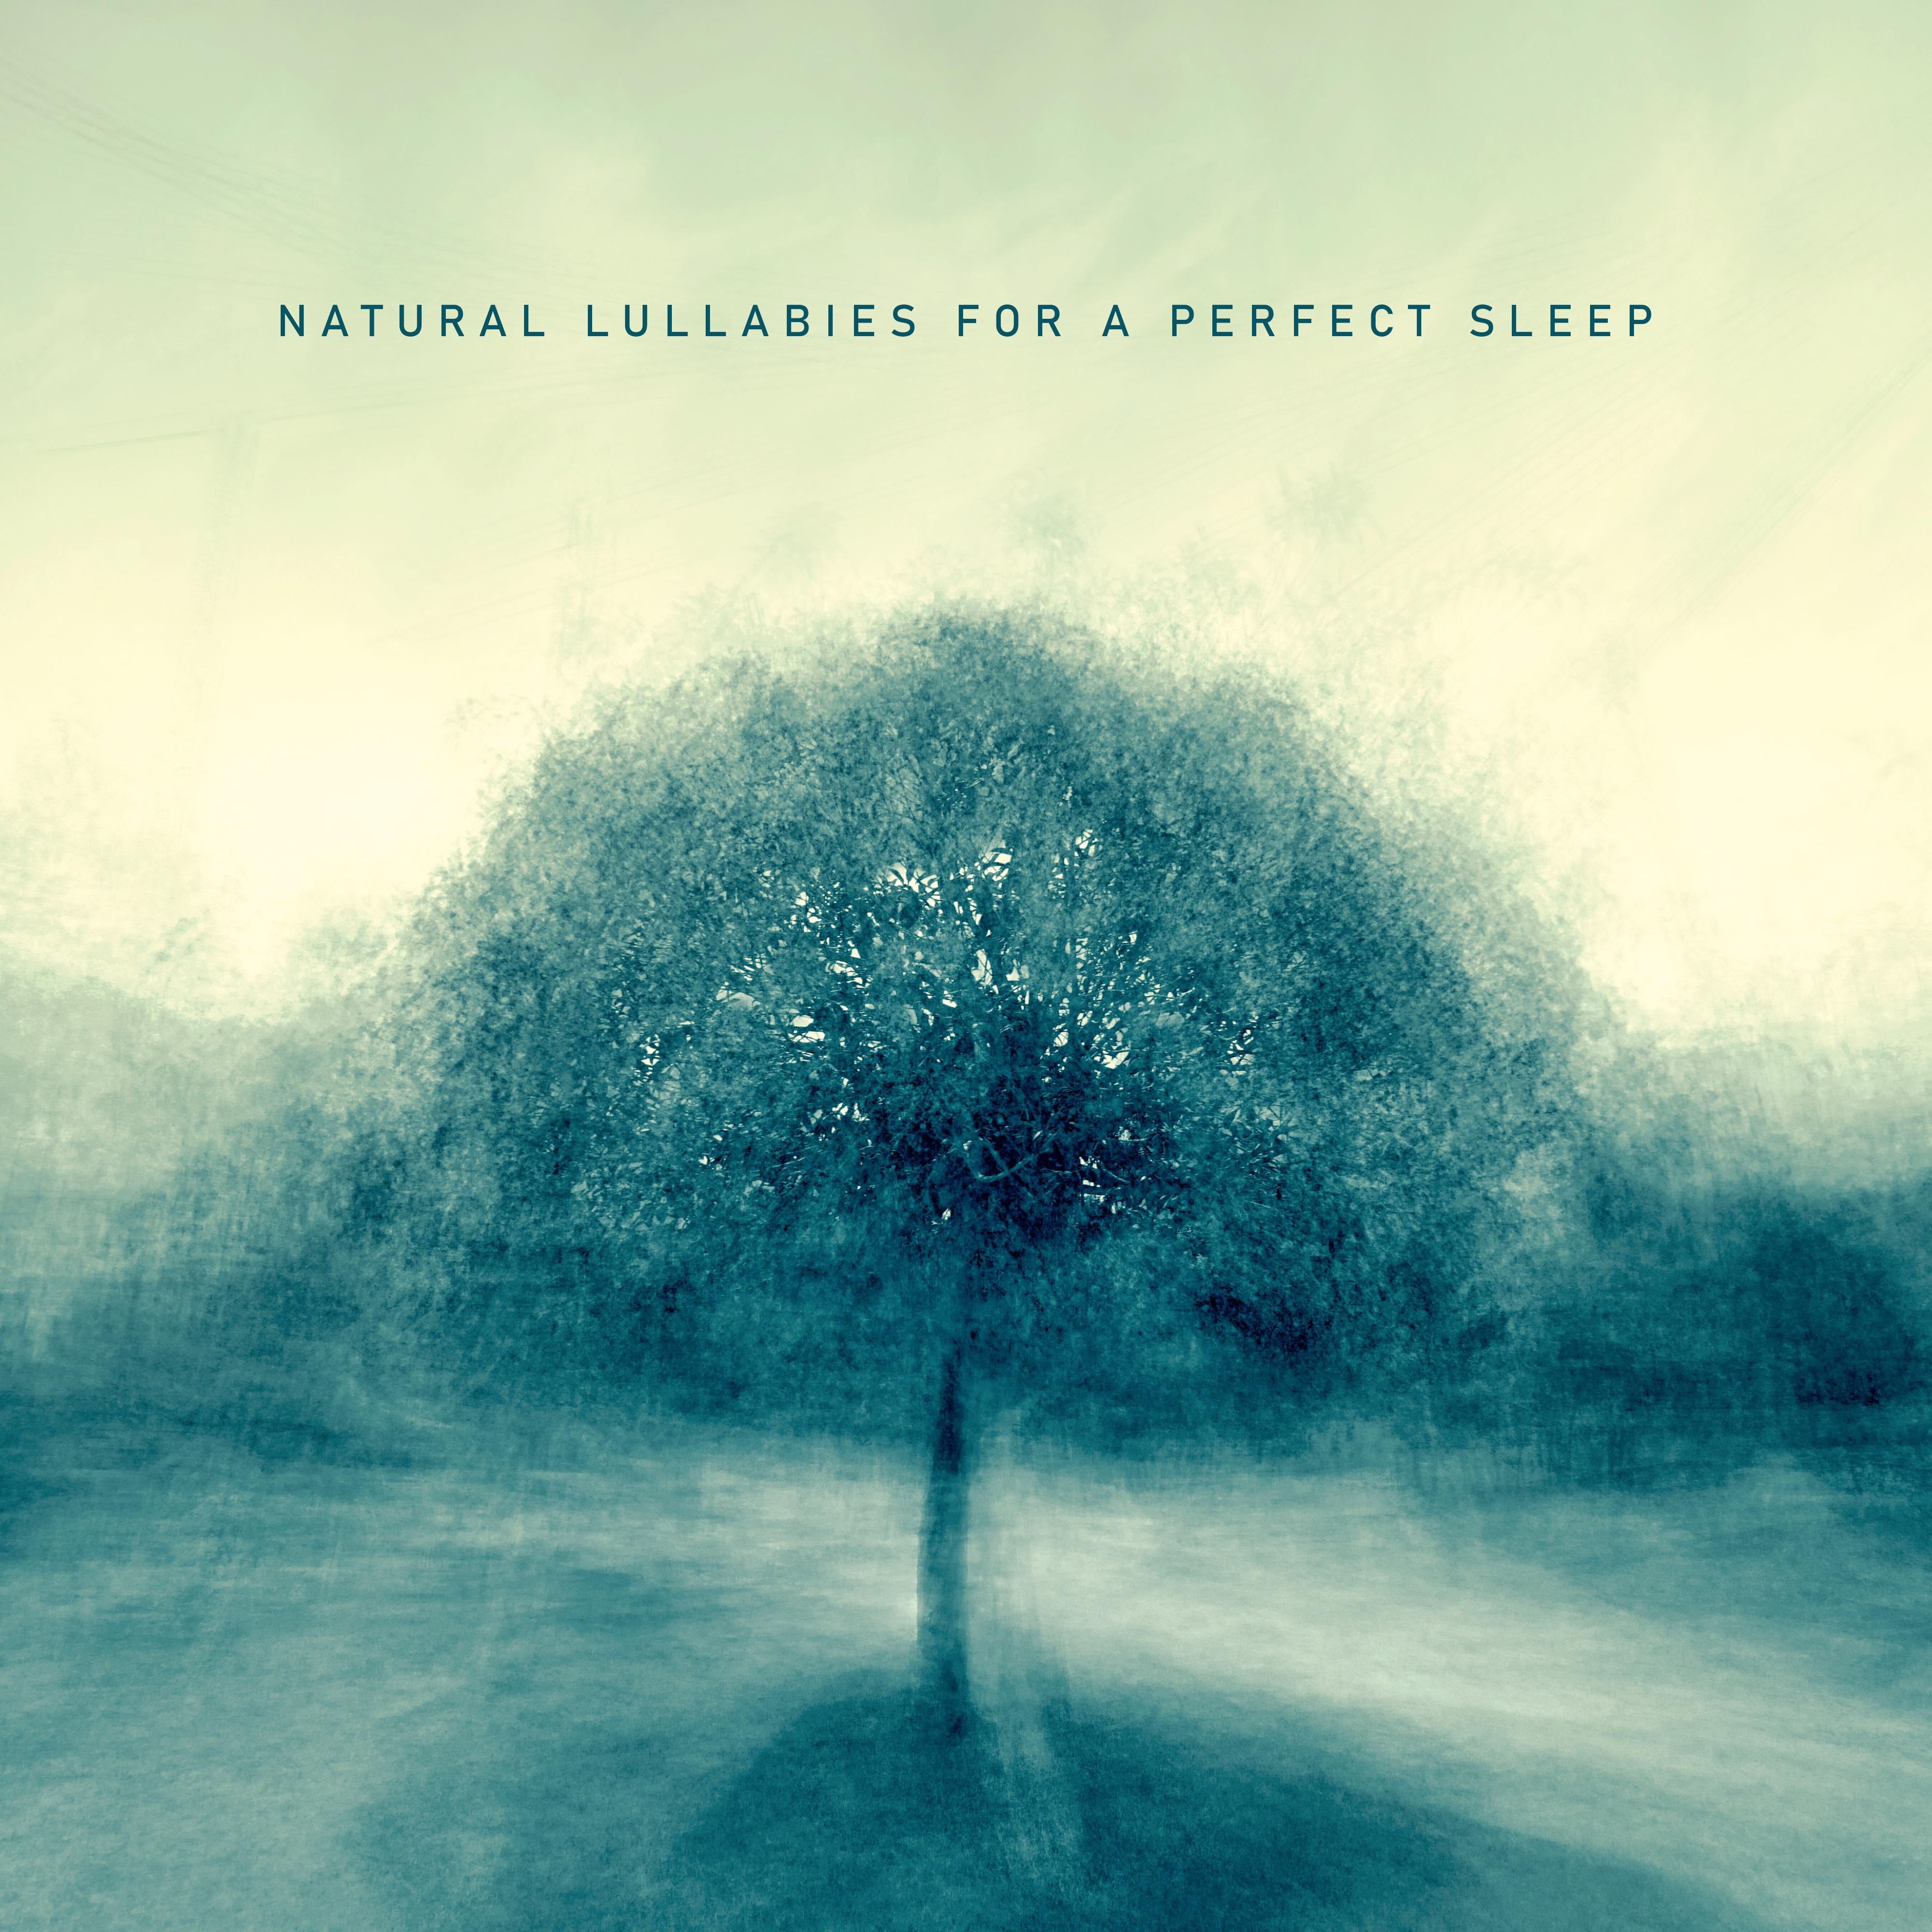 Natural Lullabies for a Perfect Sleep: New Age Nature Music 2019 Collection for Full Rest After Tough Day, Calming Down, Stress Relief & Sleep Well All Night Long